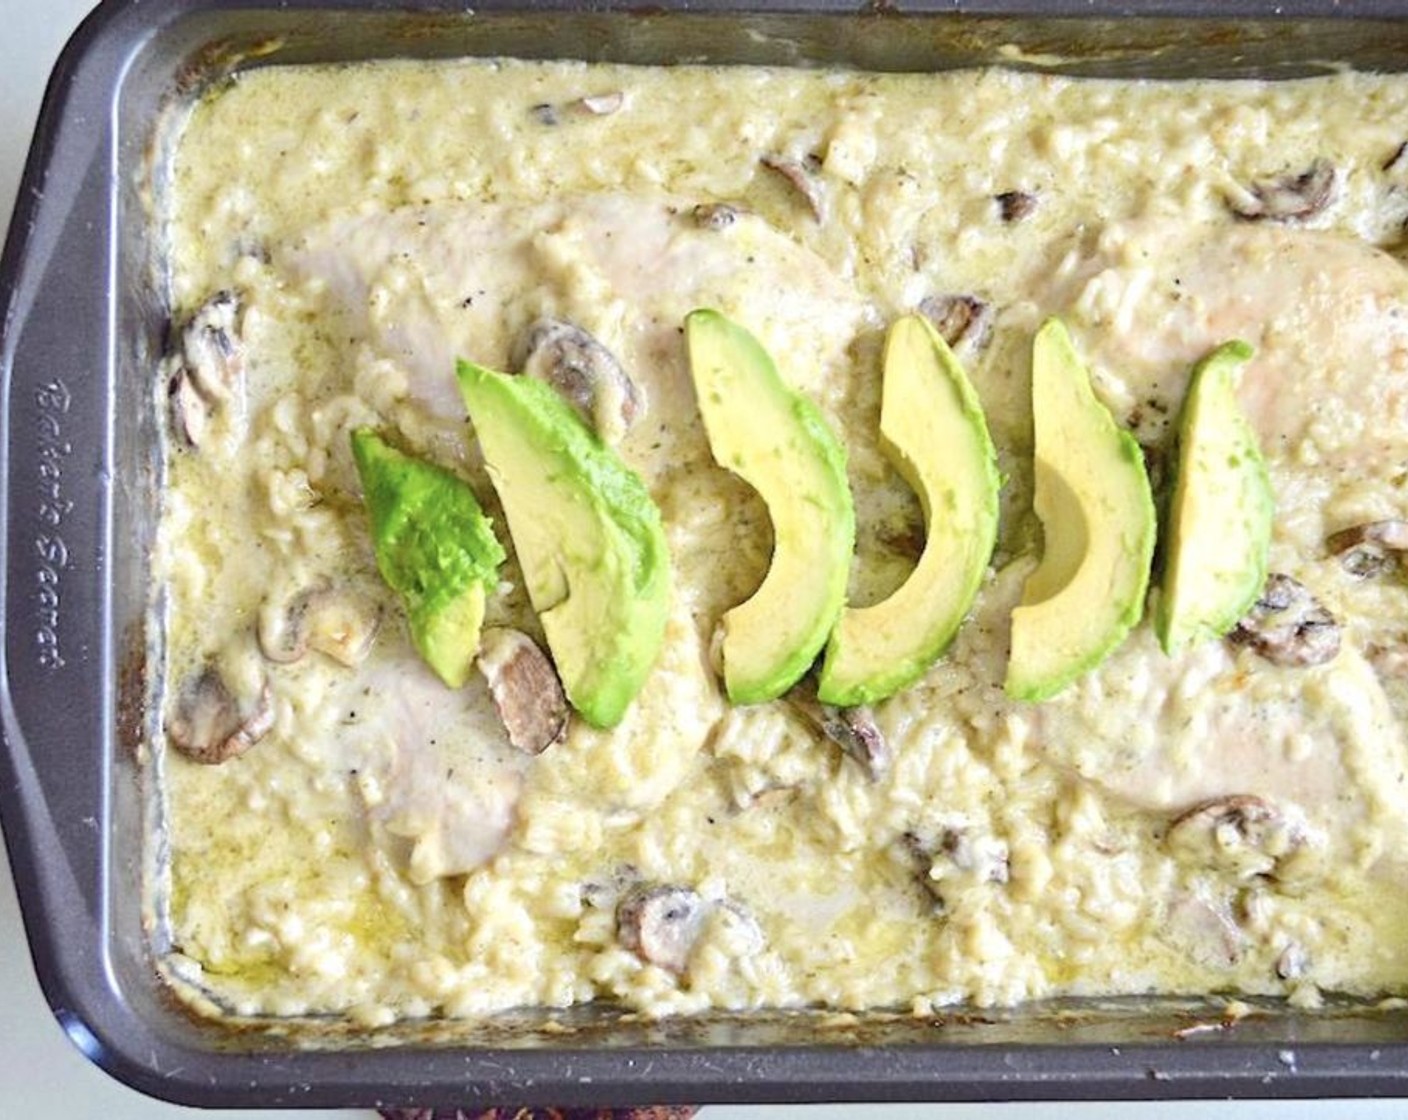 step 5 When the casserole is done, place the Avocados (to taste) on top and serve immediately!